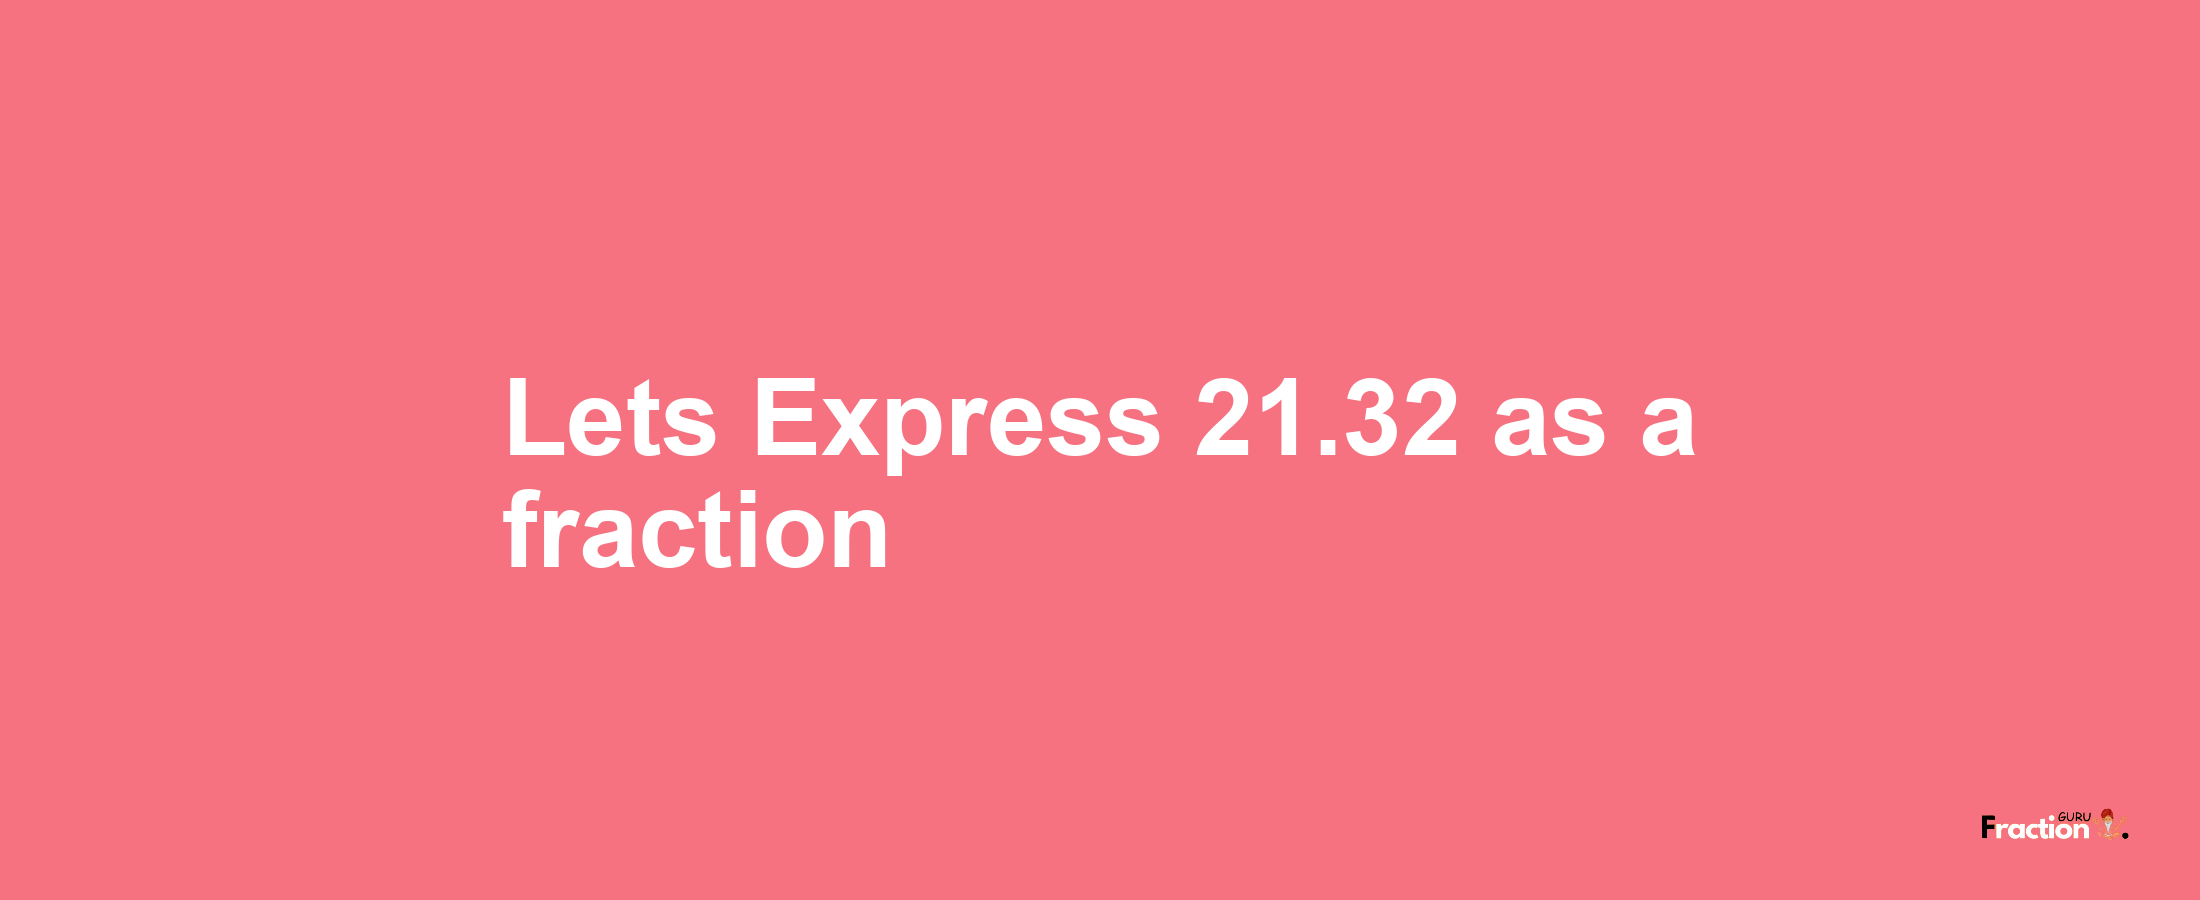 Lets Express 21.32 as afraction